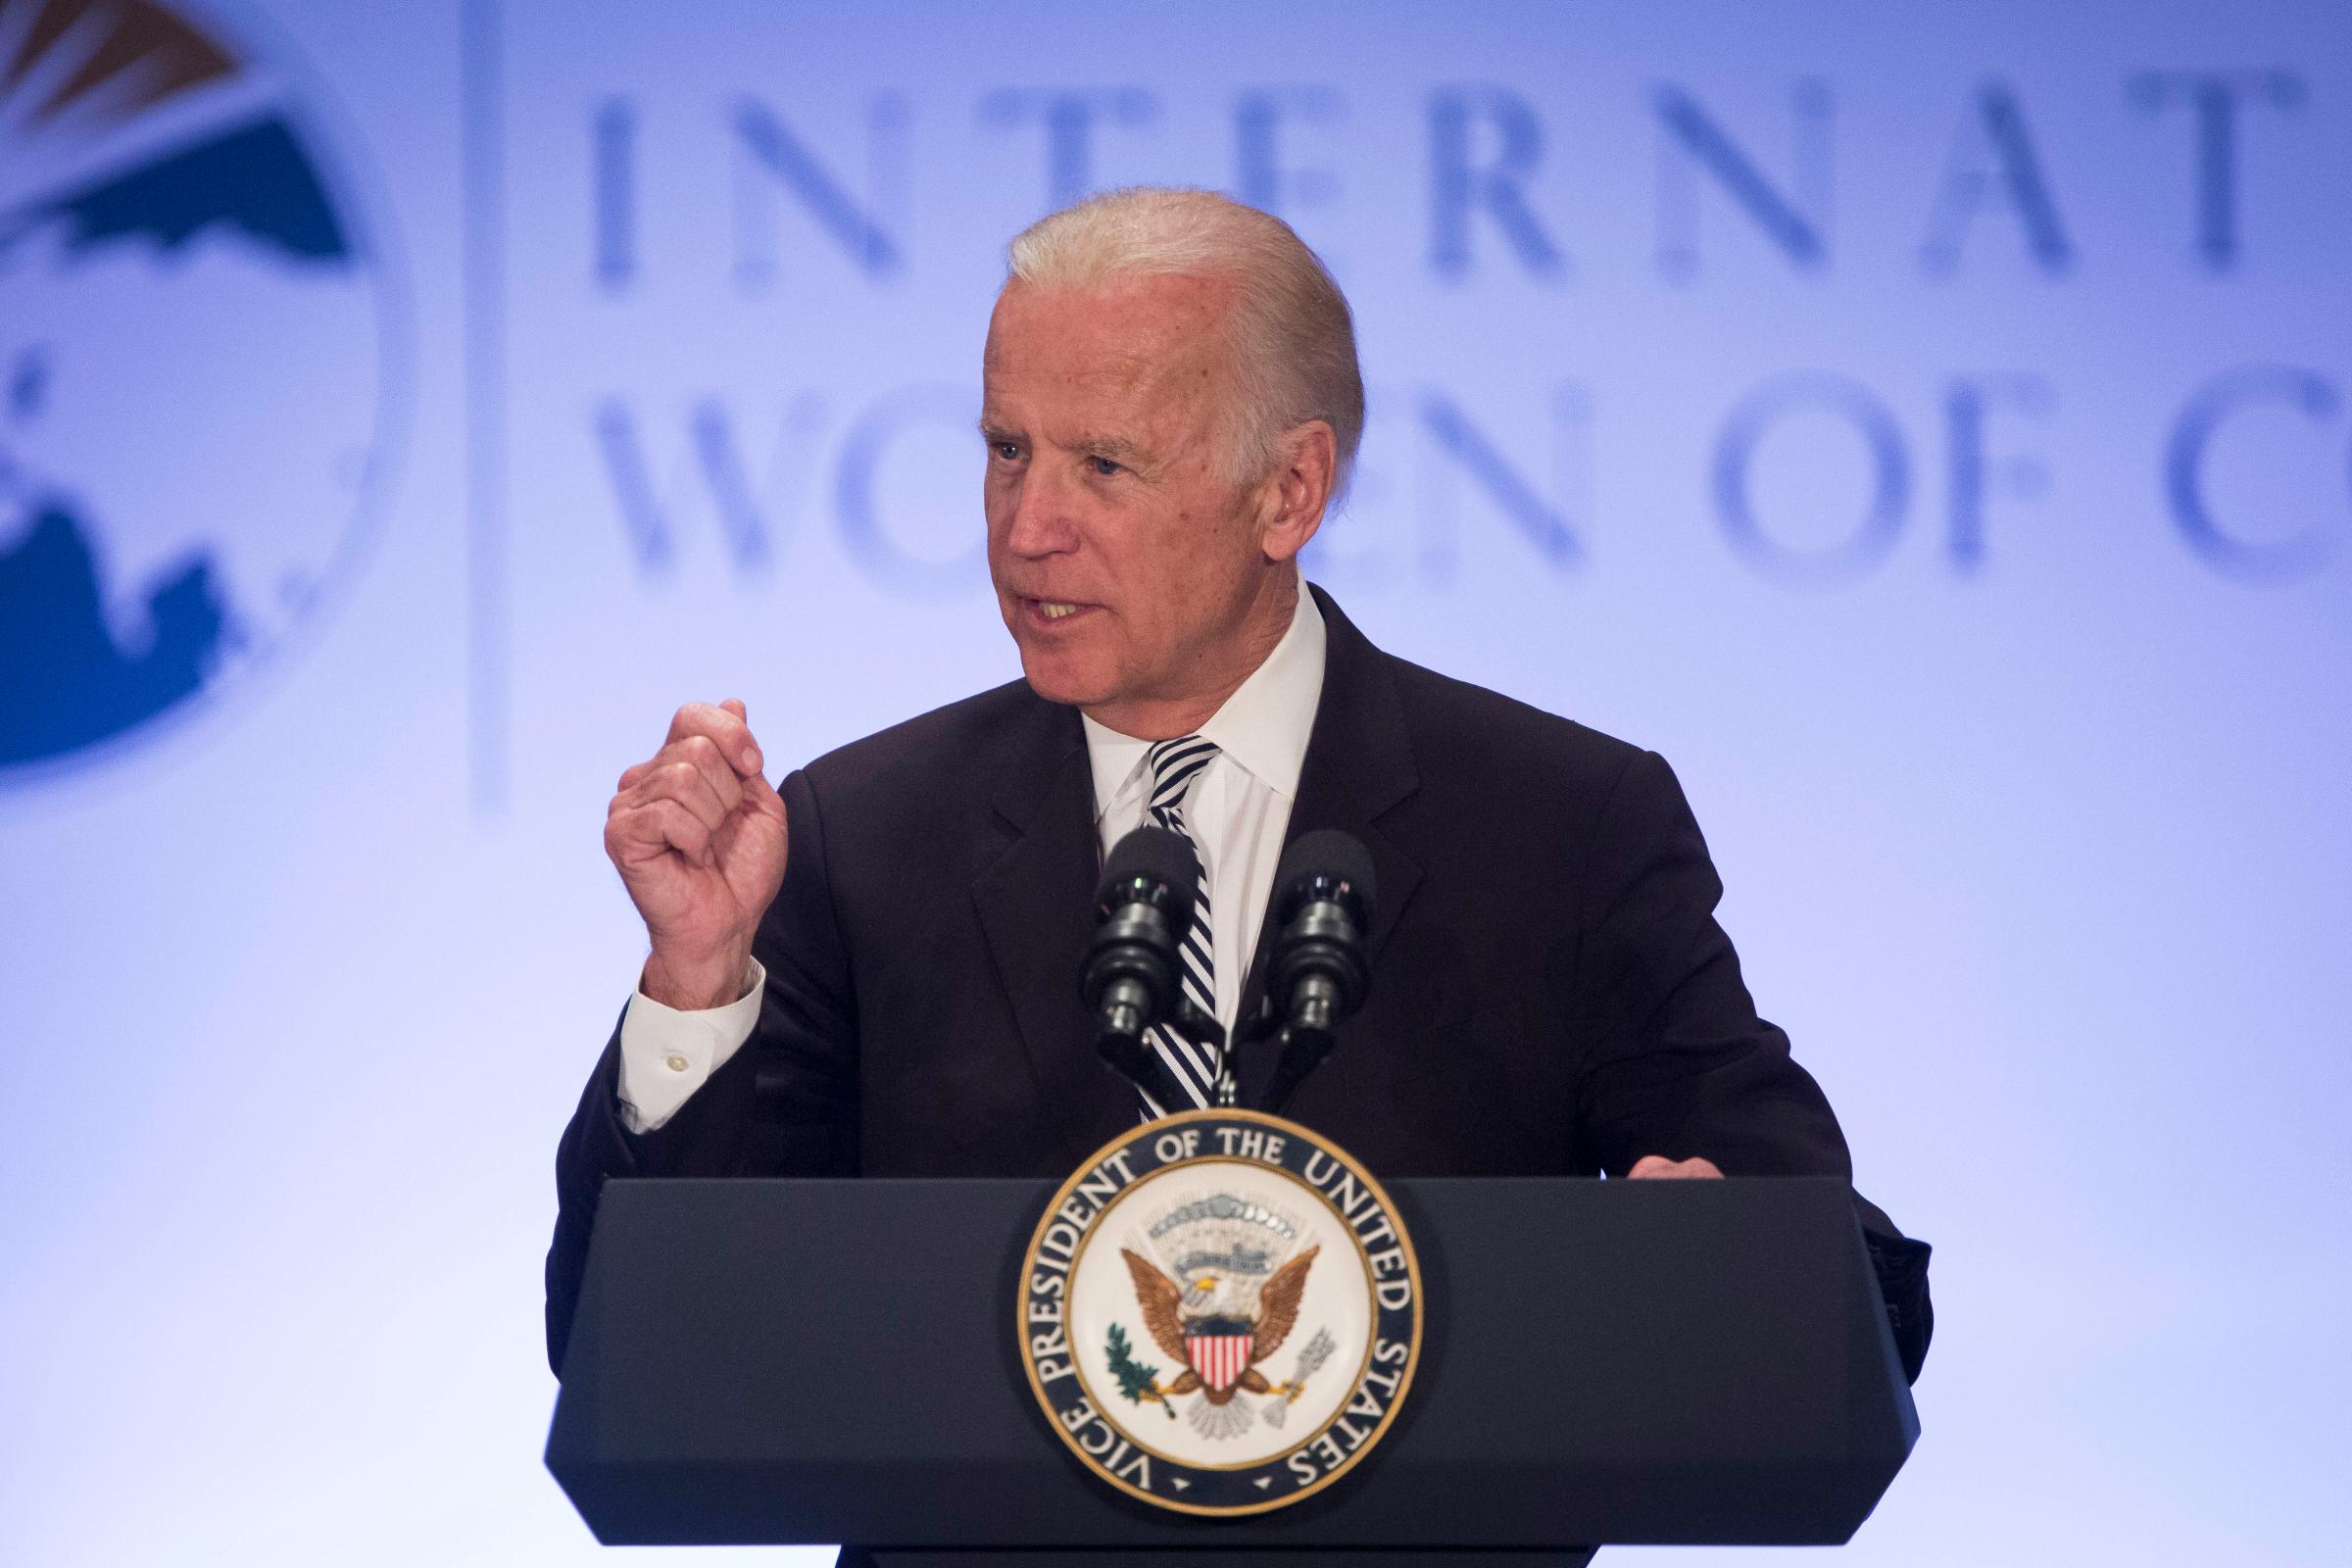 U.S. Vice President Joe Biden delivers remarks during the 2016 International Women of Courage Forum at the State Department, March 29, 2016 in Washington, DC. Established in 2007, the awards honor women around the world for leadership and courage in equality, social progress and human rights. Fourteen women were recognized this year.